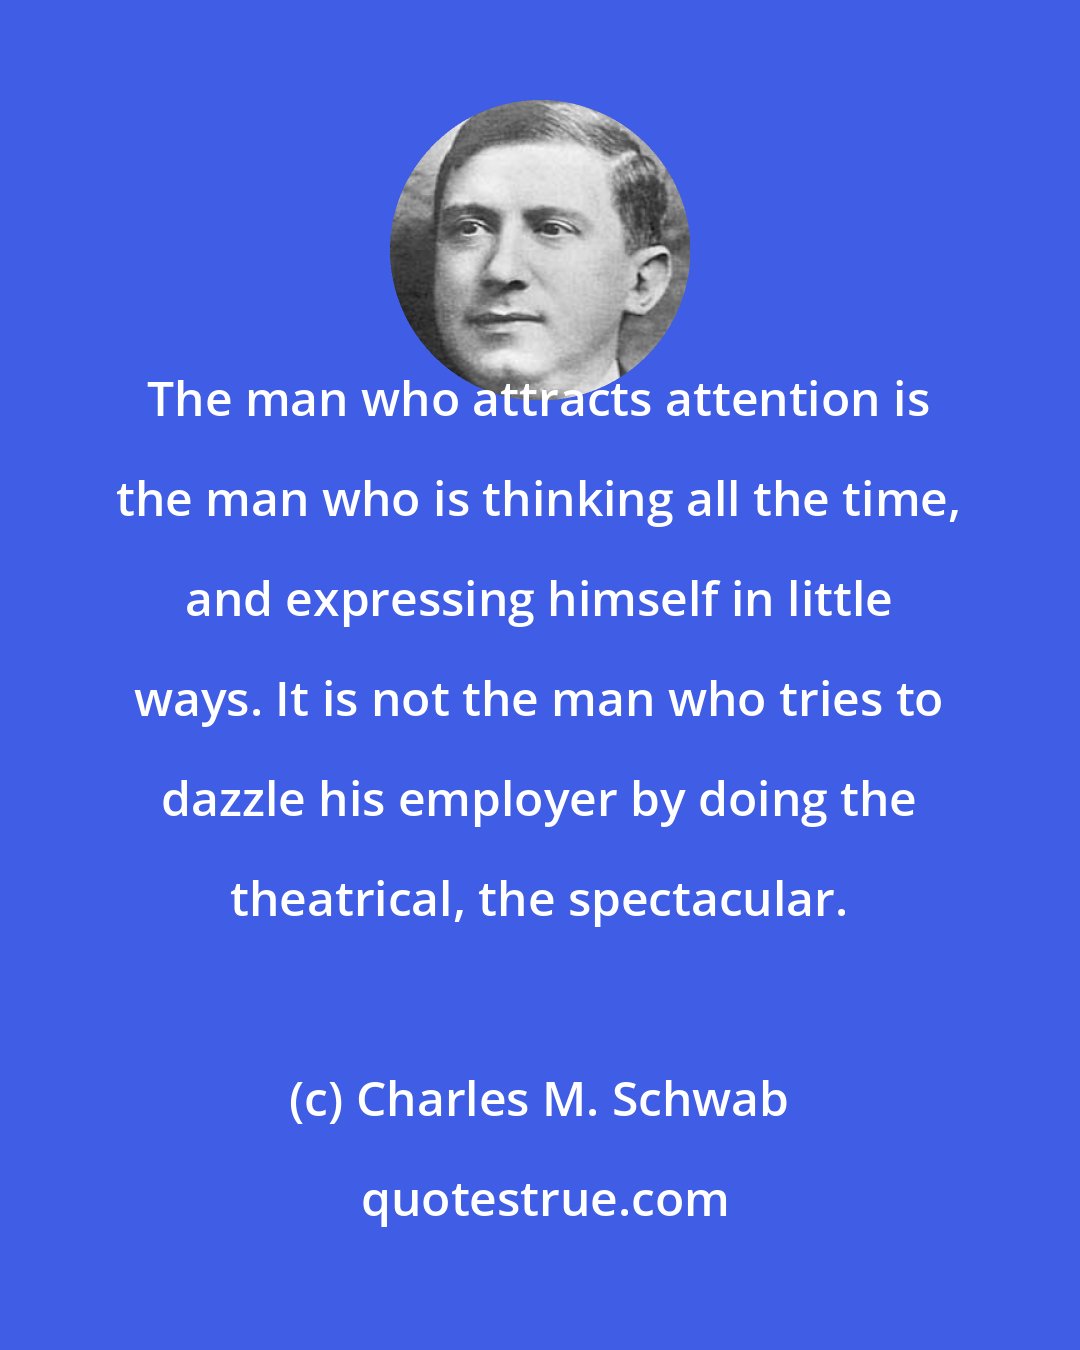 Charles M. Schwab: The man who attracts attention is the man who is thinking all the time, and expressing himself in little ways. It is not the man who tries to dazzle his employer by doing the theatrical, the spectacular.